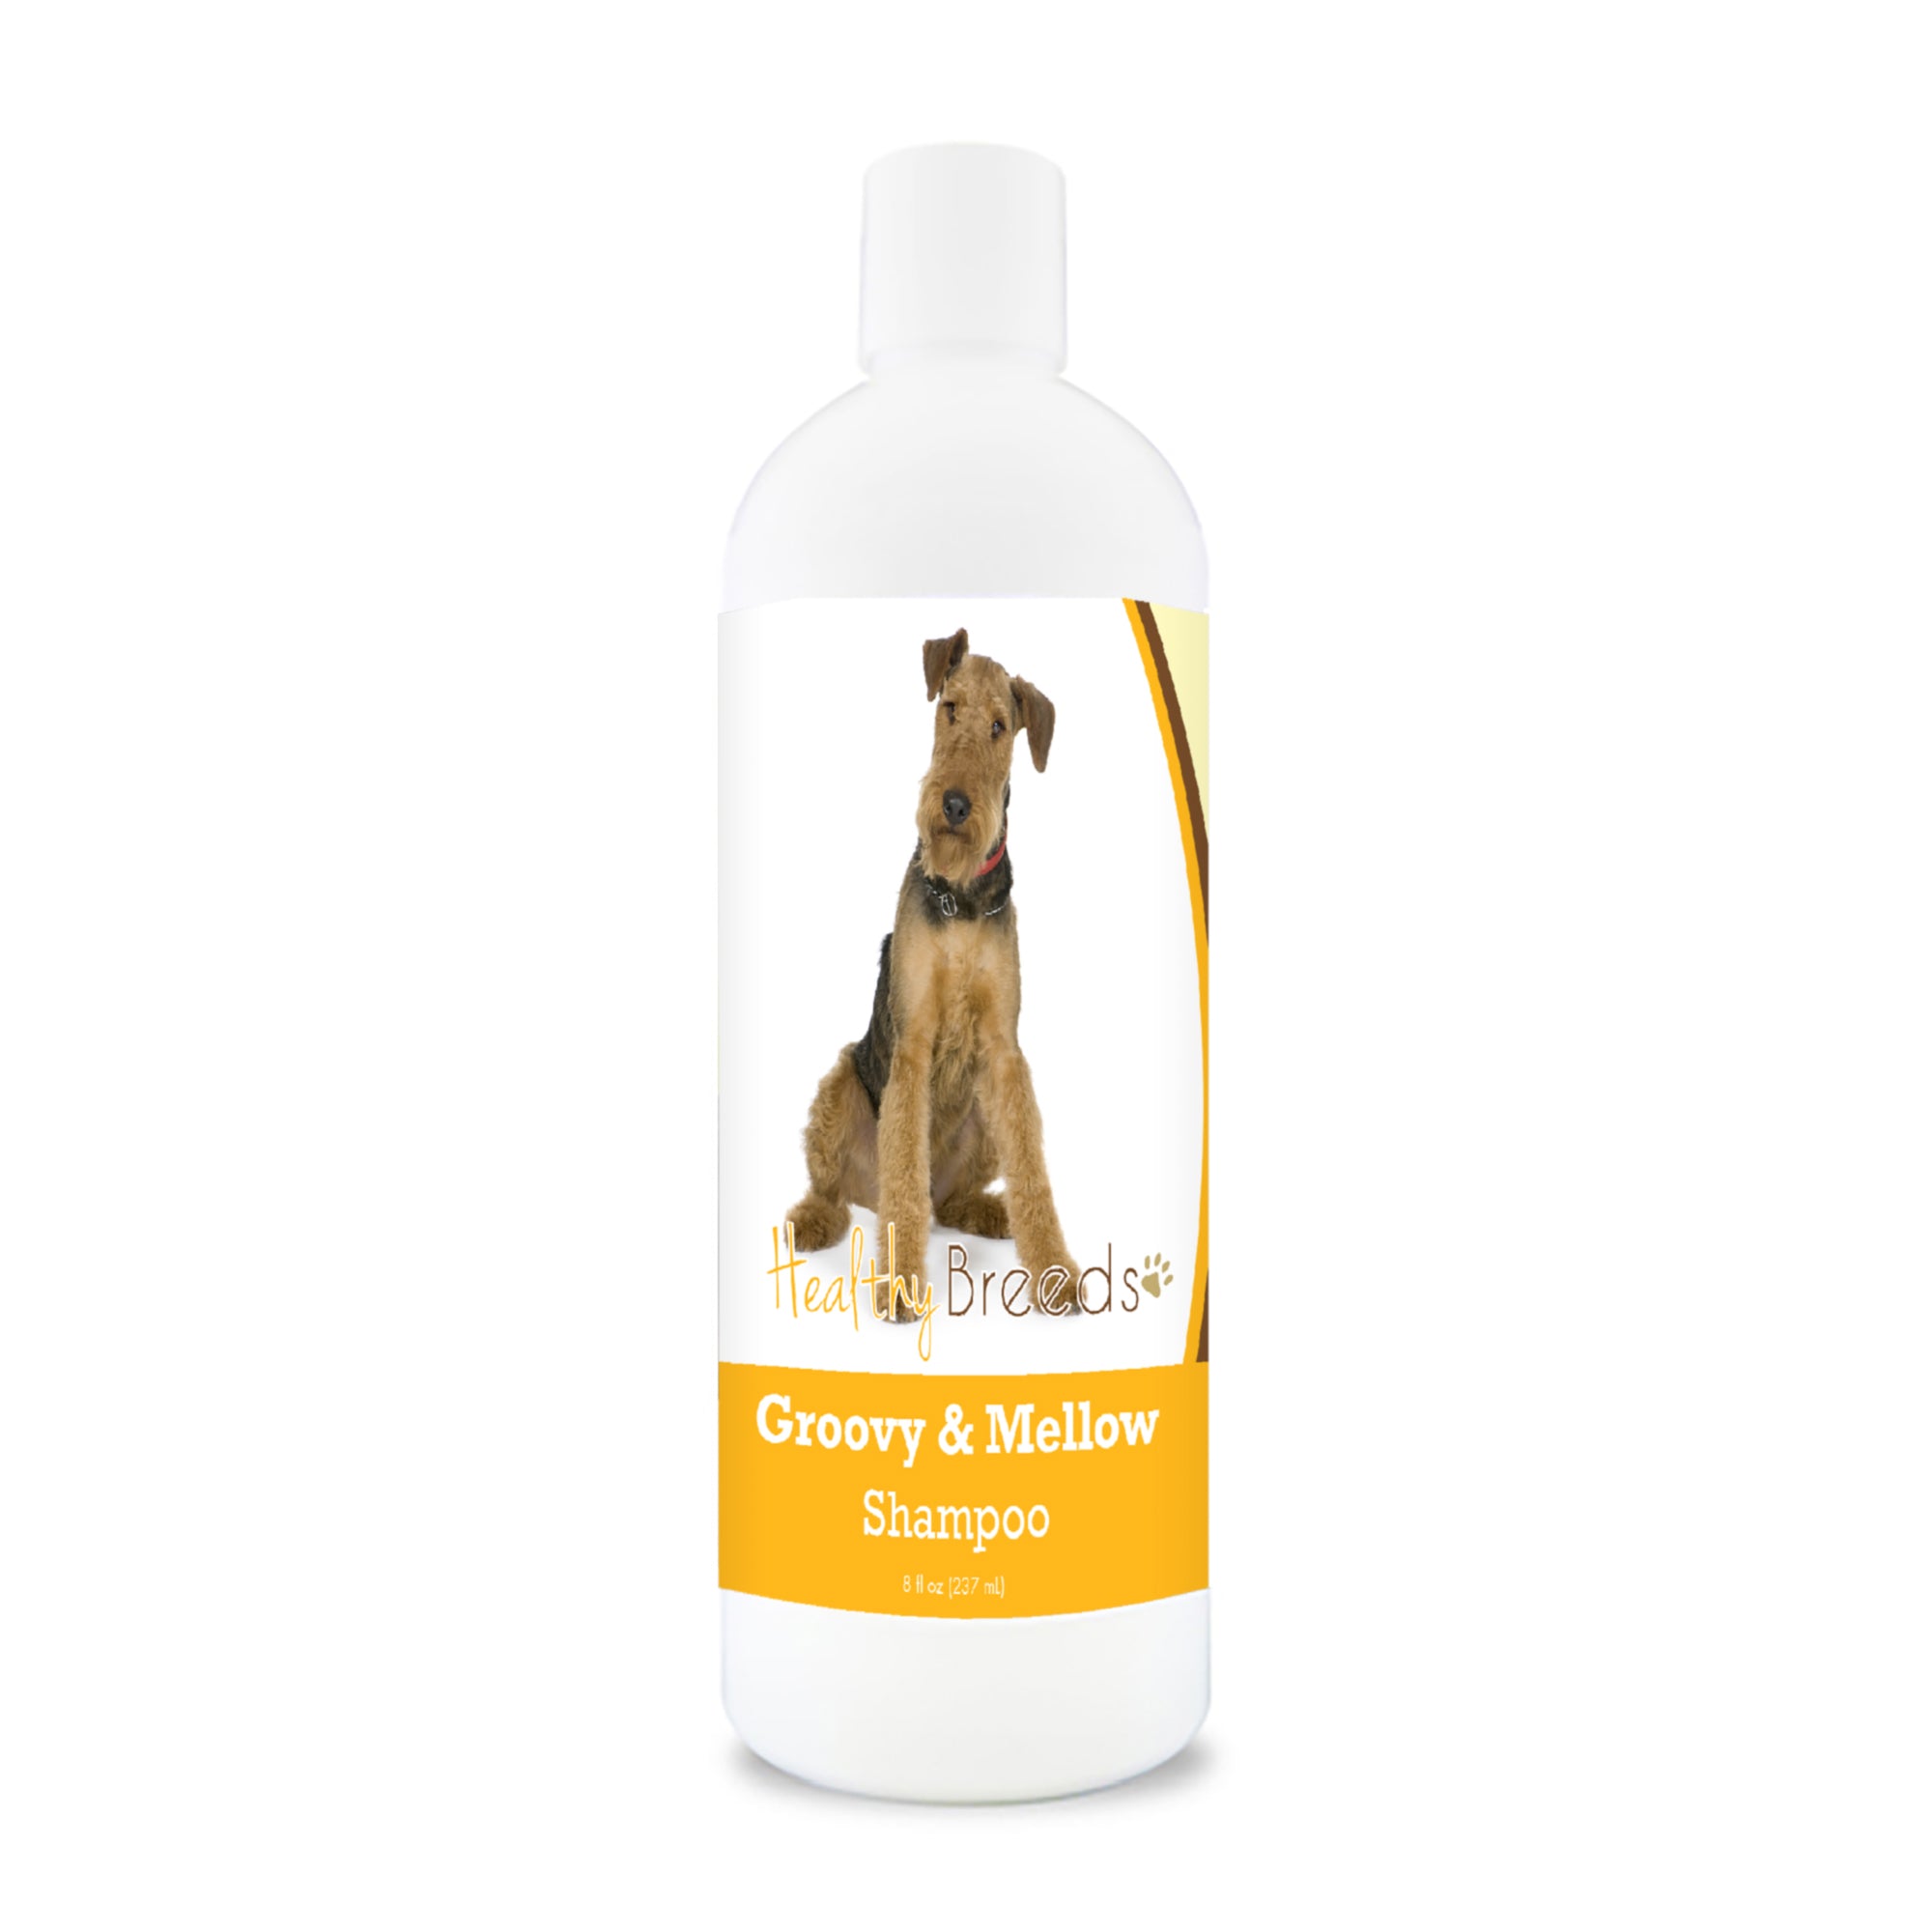 Airedale Terrier Groovy & Mellow Shampoo 8 oz